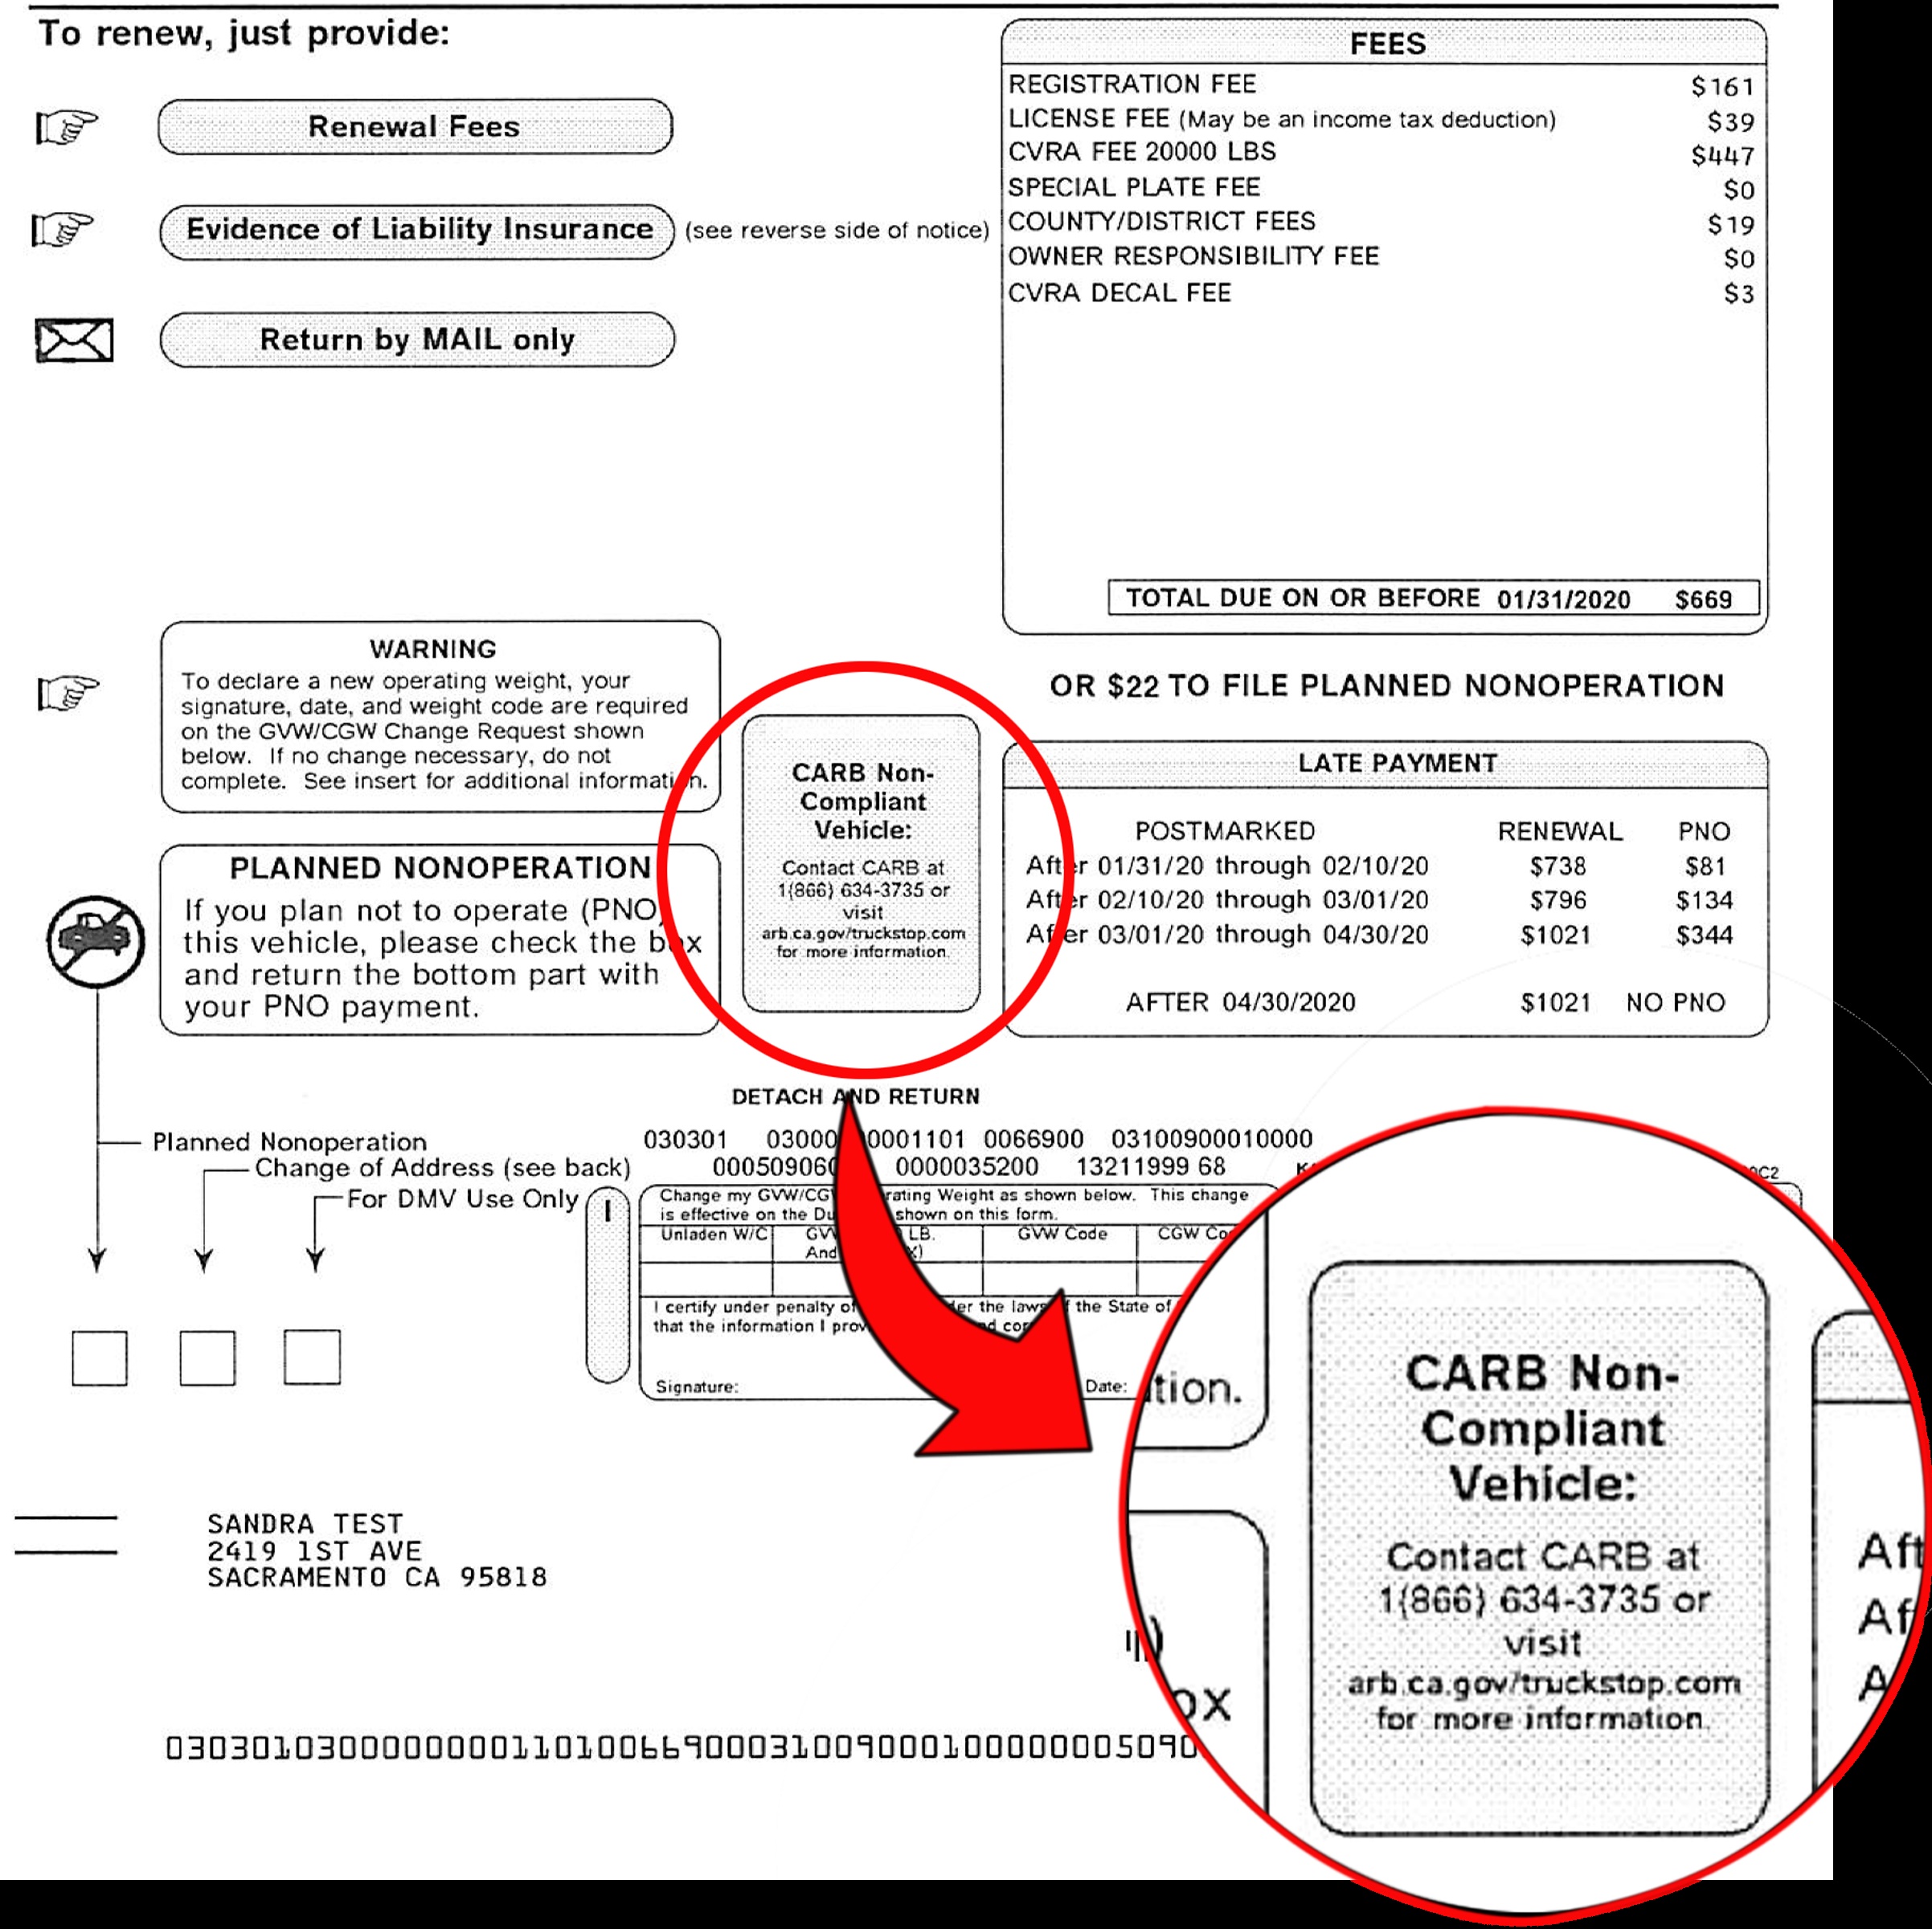 Image of example DMV Registration renewal with the CARB Non-Compliant Vehicle warning highlighted